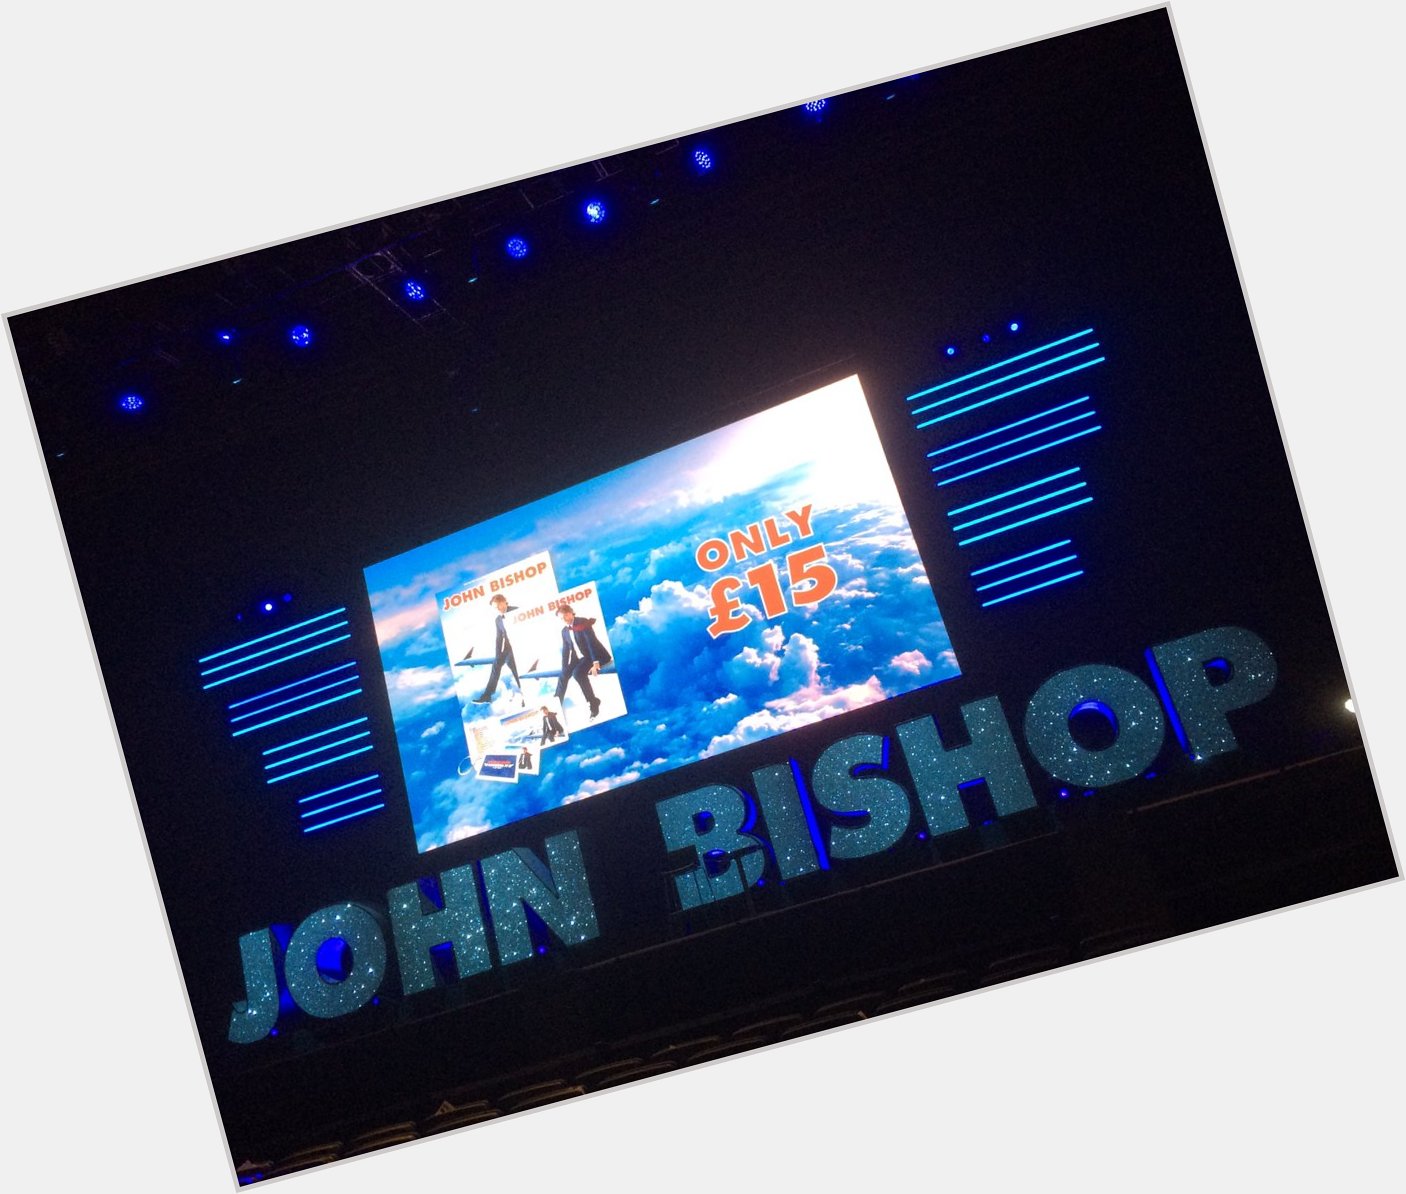 Waiting for John Bishop to come on stage happy birthday Cathy xxx   